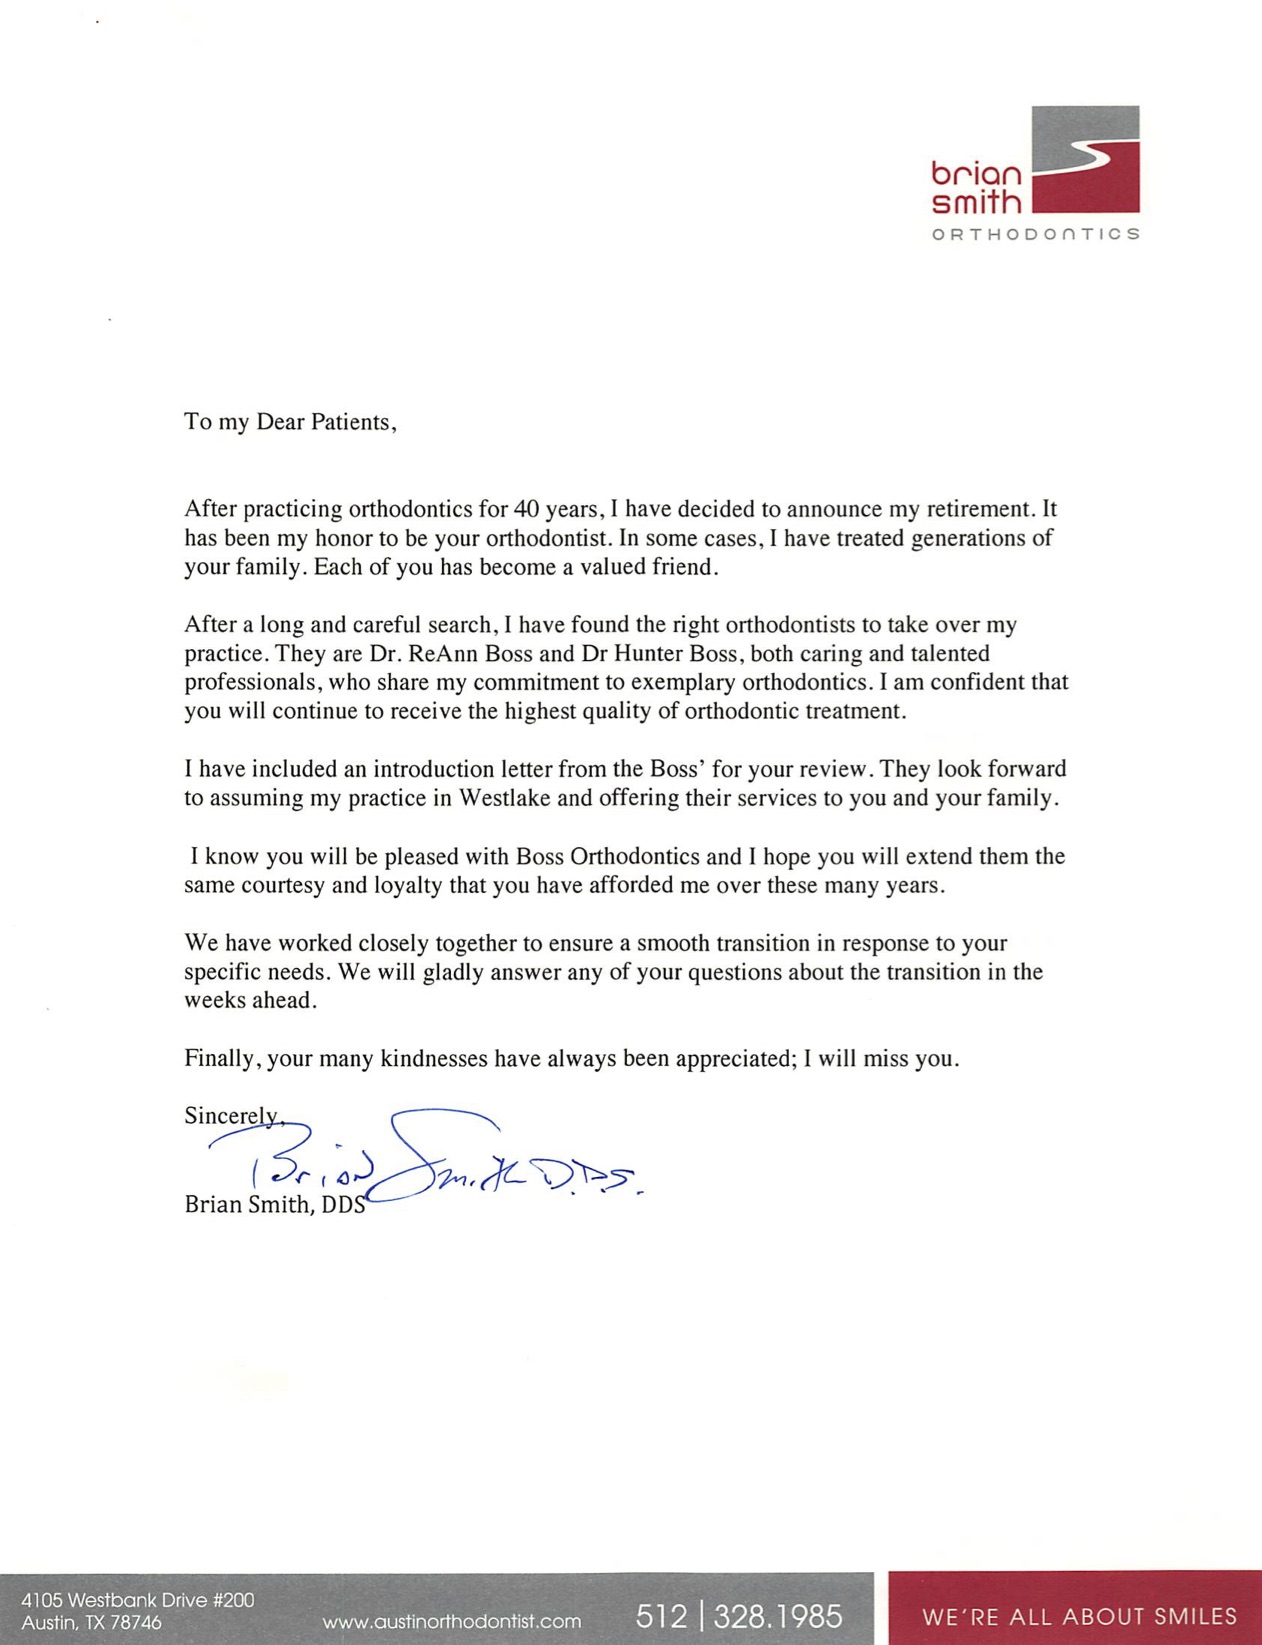 Letter from Brian Smith